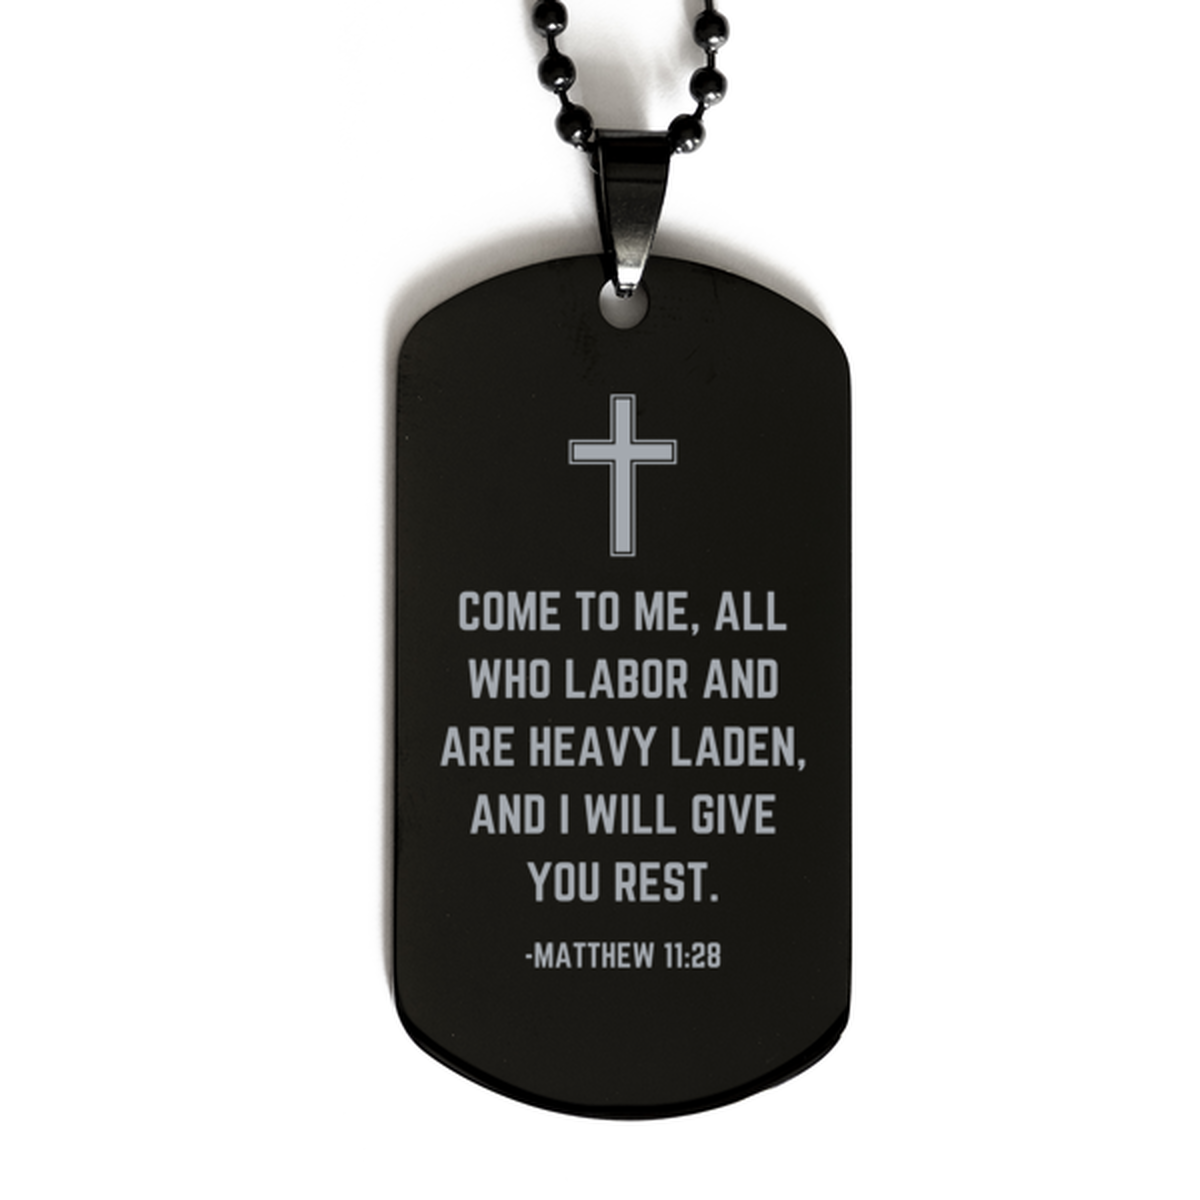 Baptism Gifts For Teenage Boys Girls, Christian Bible Verse Black Dog Tag, Come to me, all who labor, Confirmation Gifts, Bible Verse Necklace for Son, Godson, Grandson, Nephew